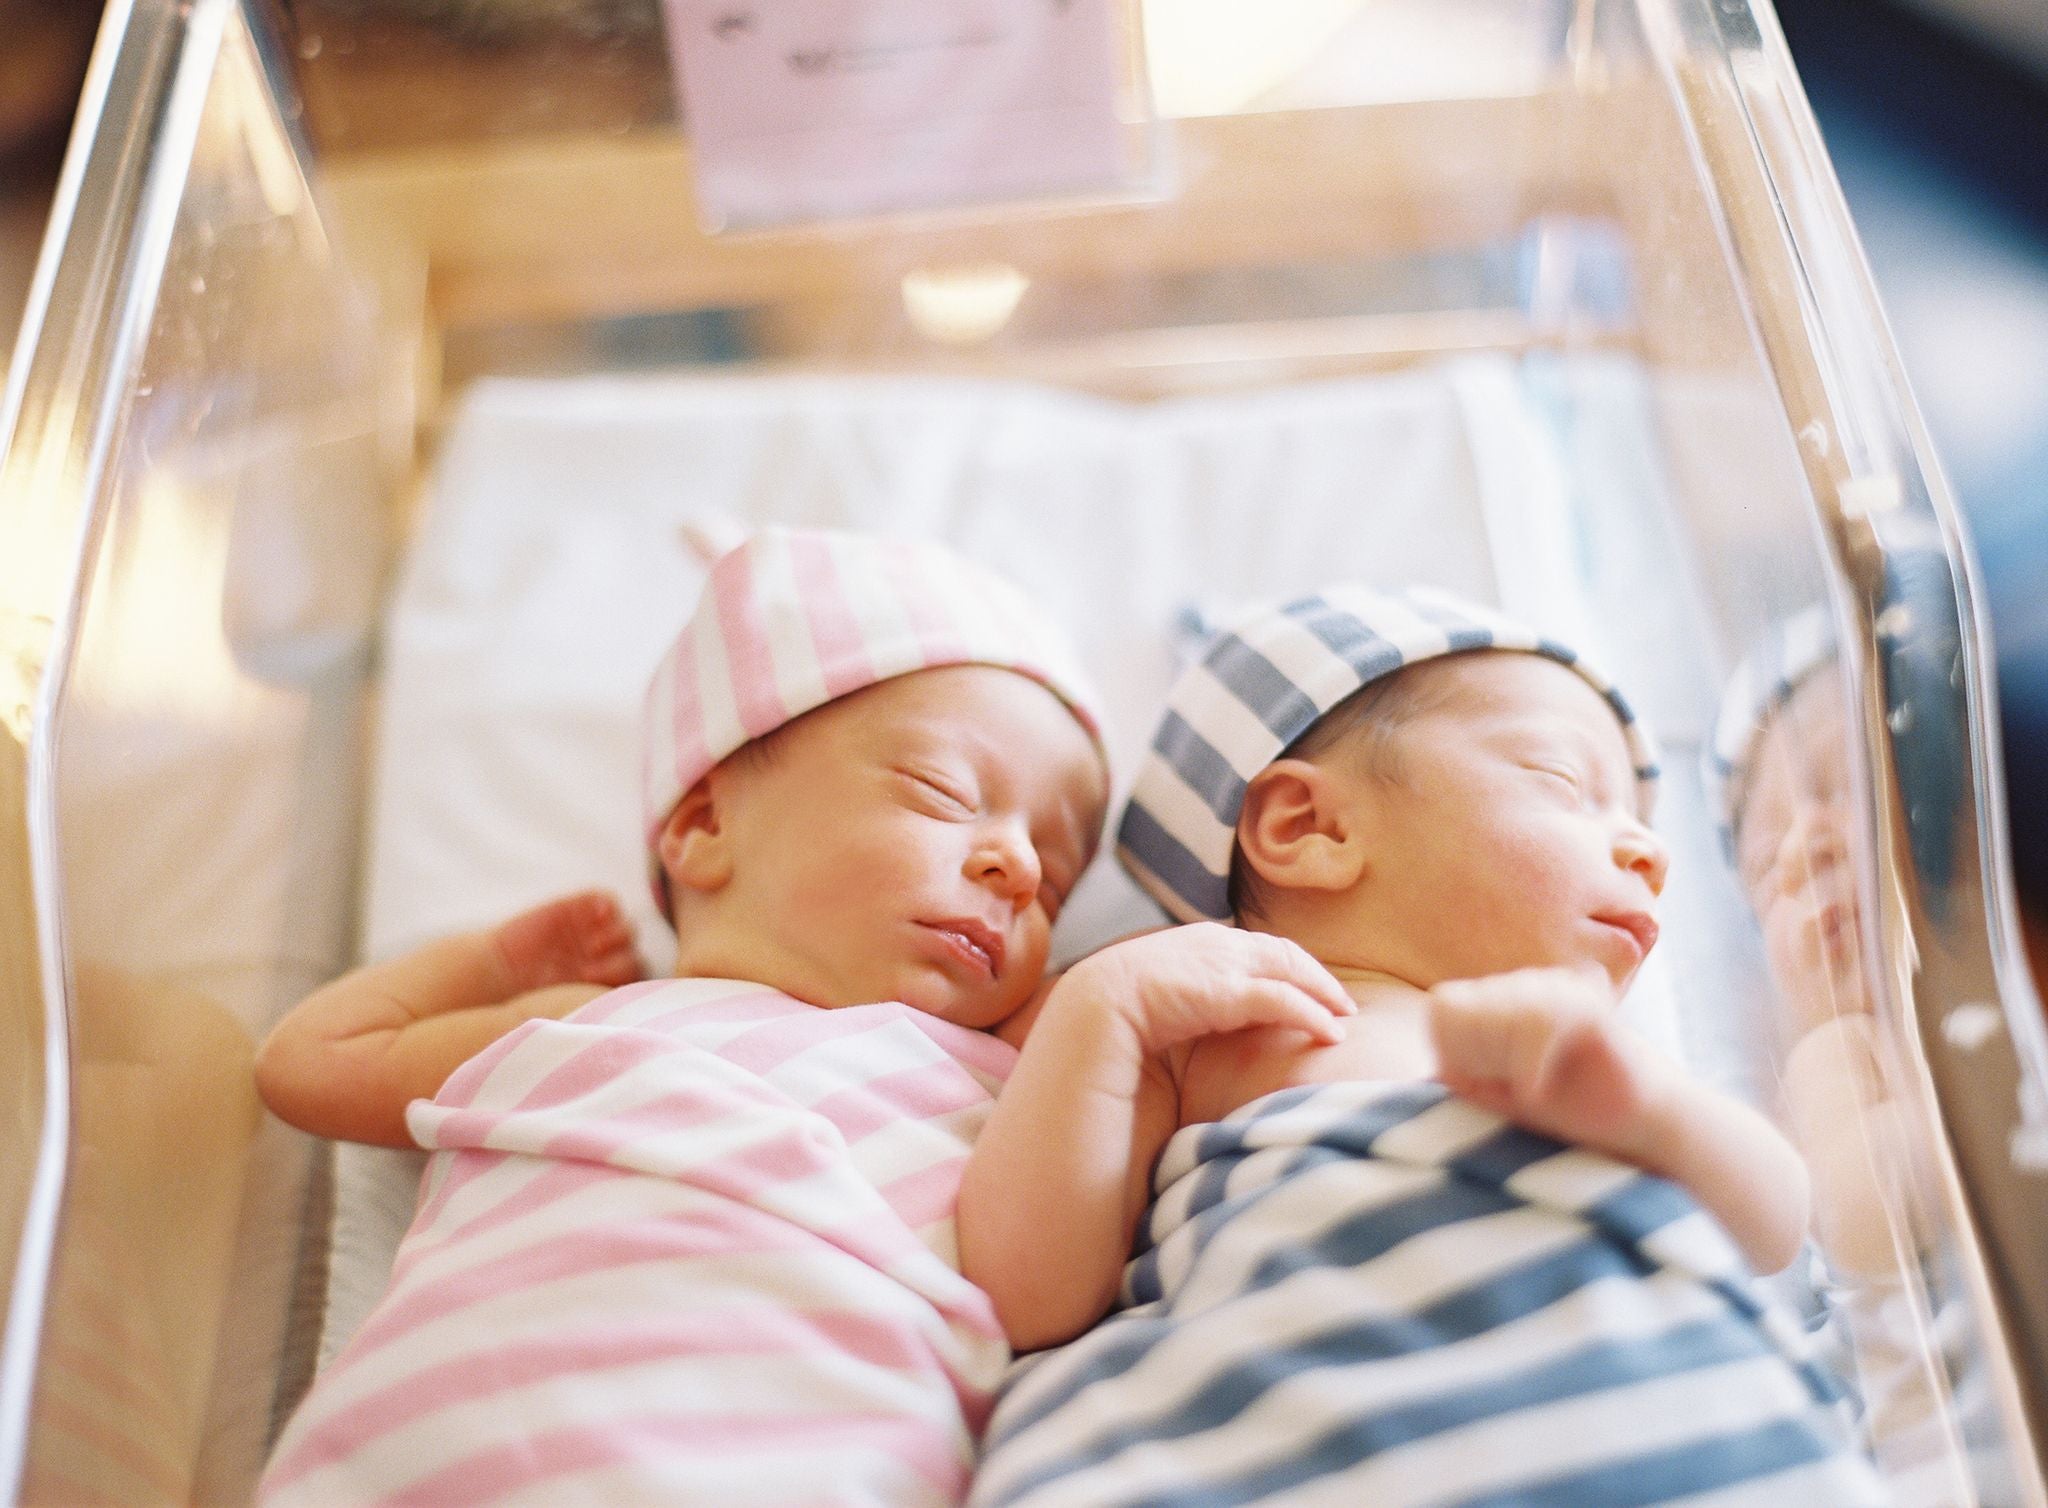 Having Twins? You NEED These Registry Items